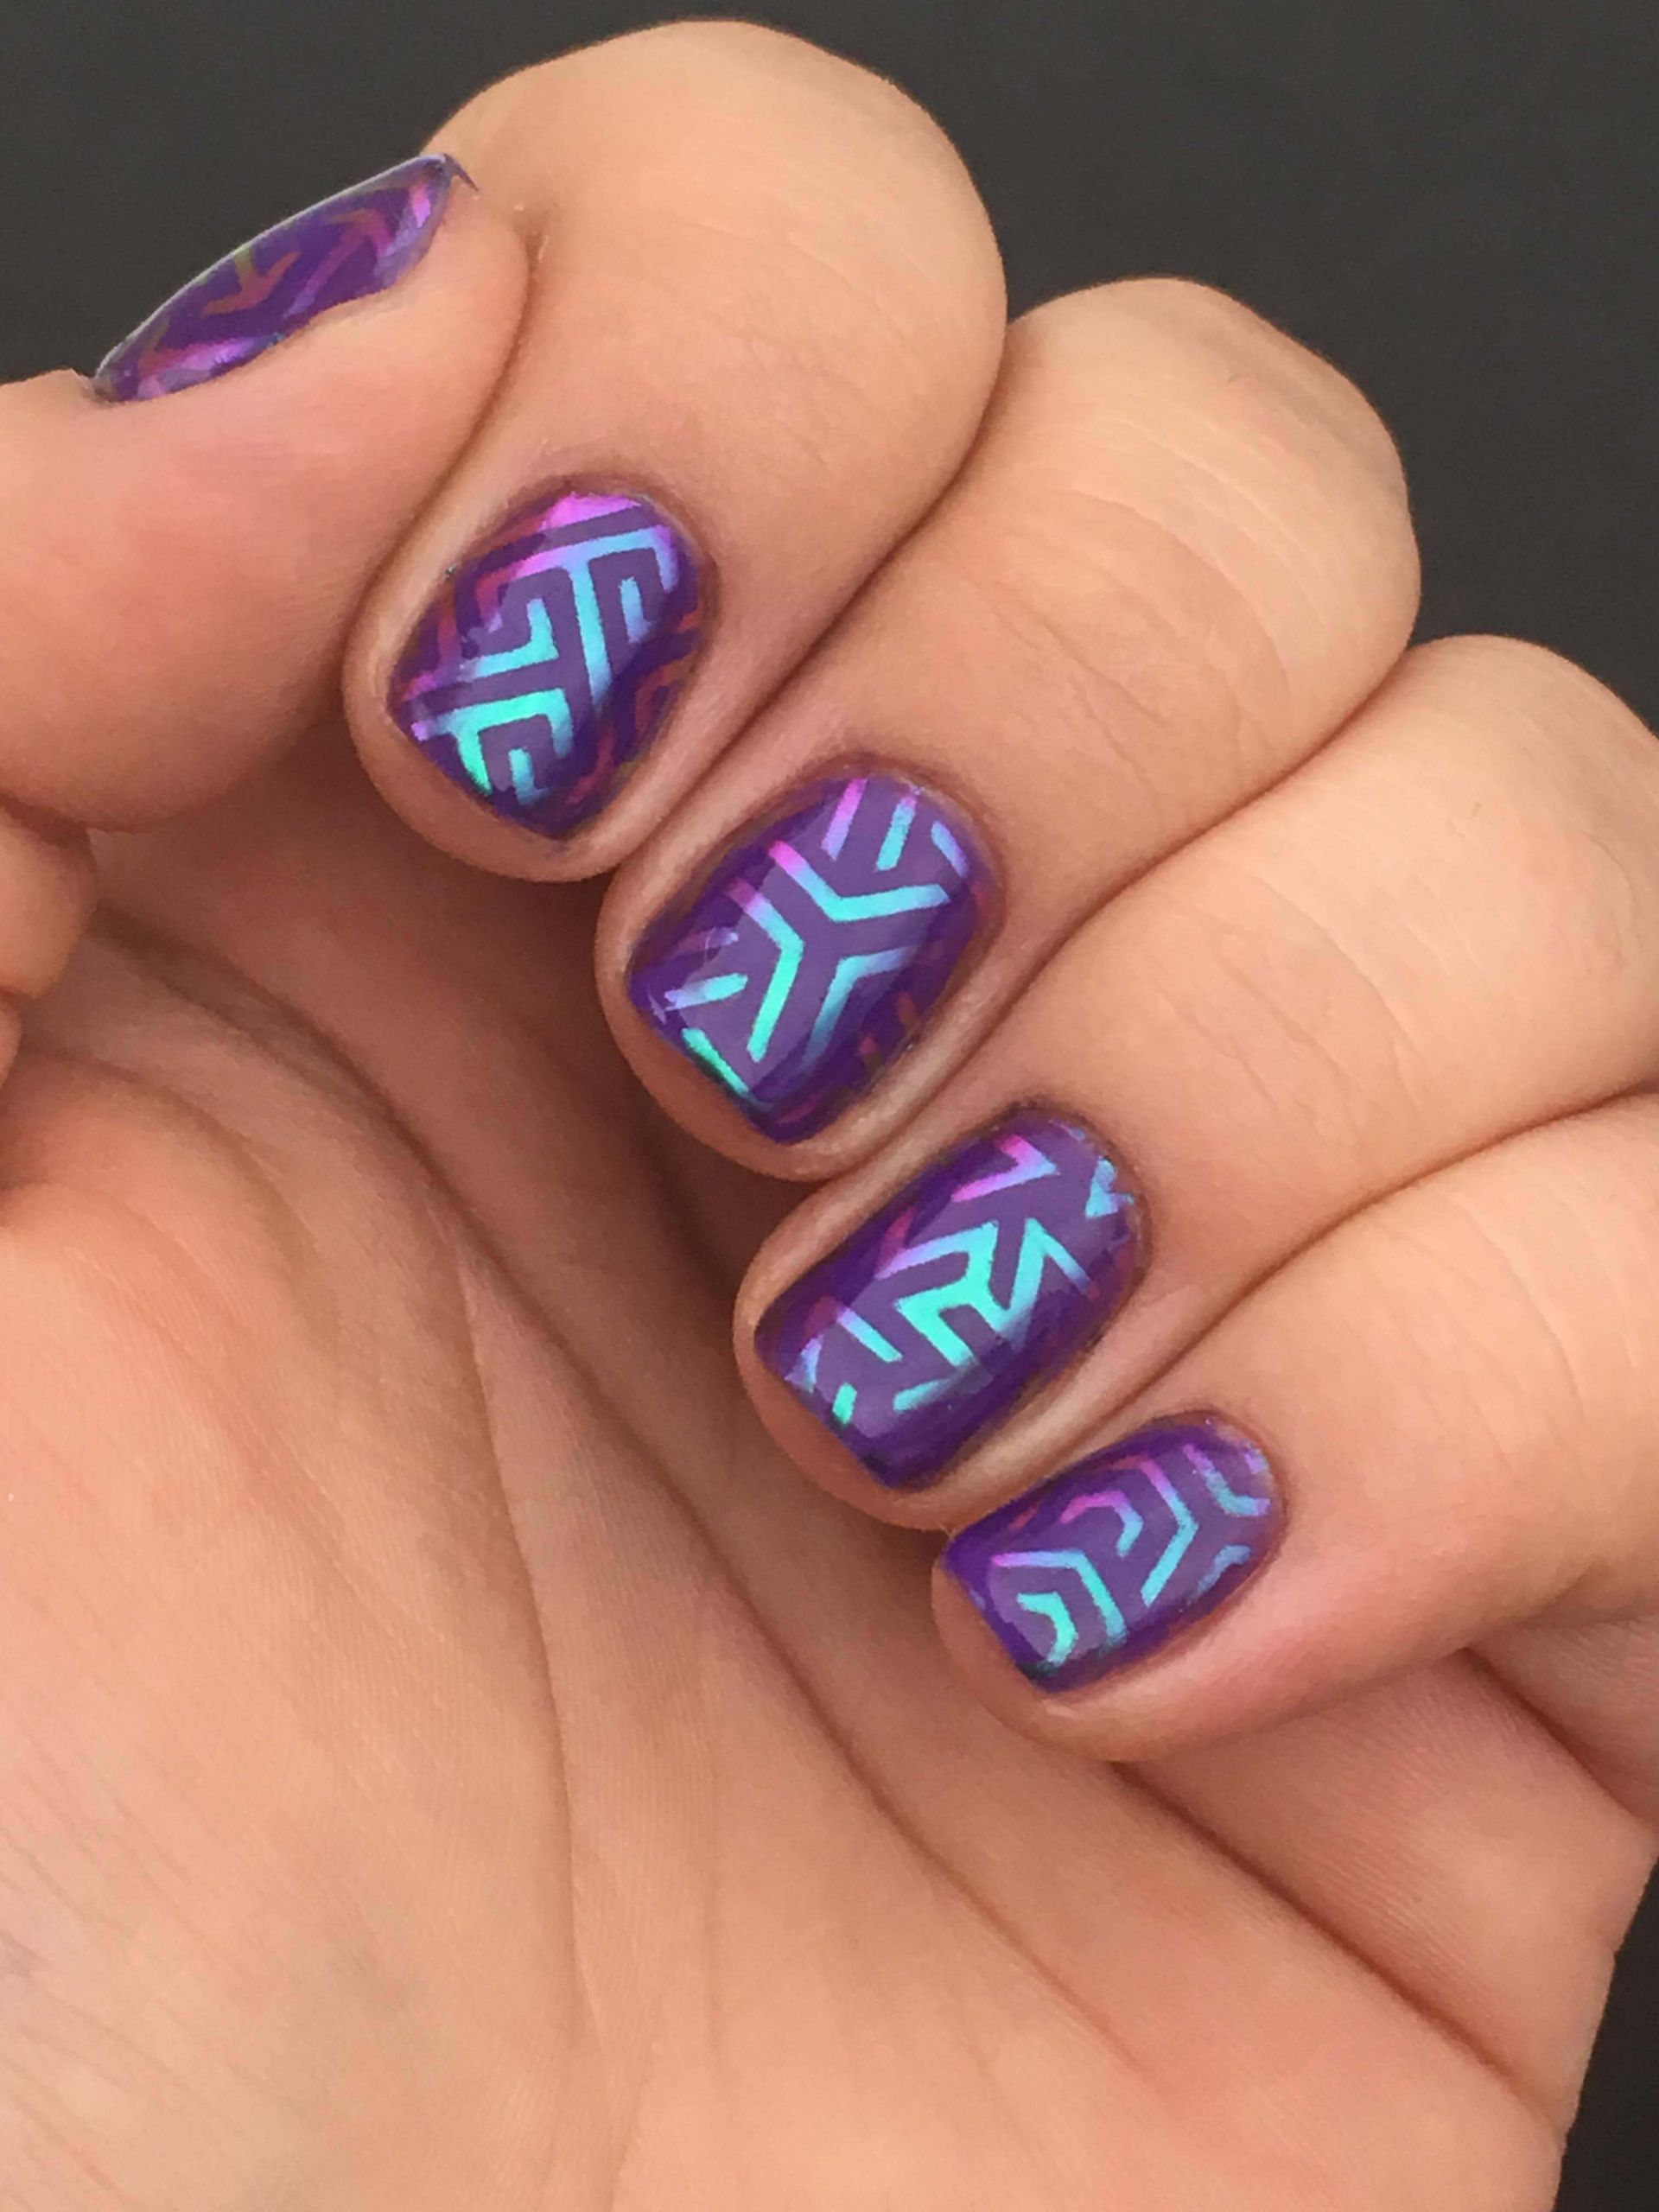 Nail Art Patterns
 Learn How To Make This Cool Geometric Nail Art With